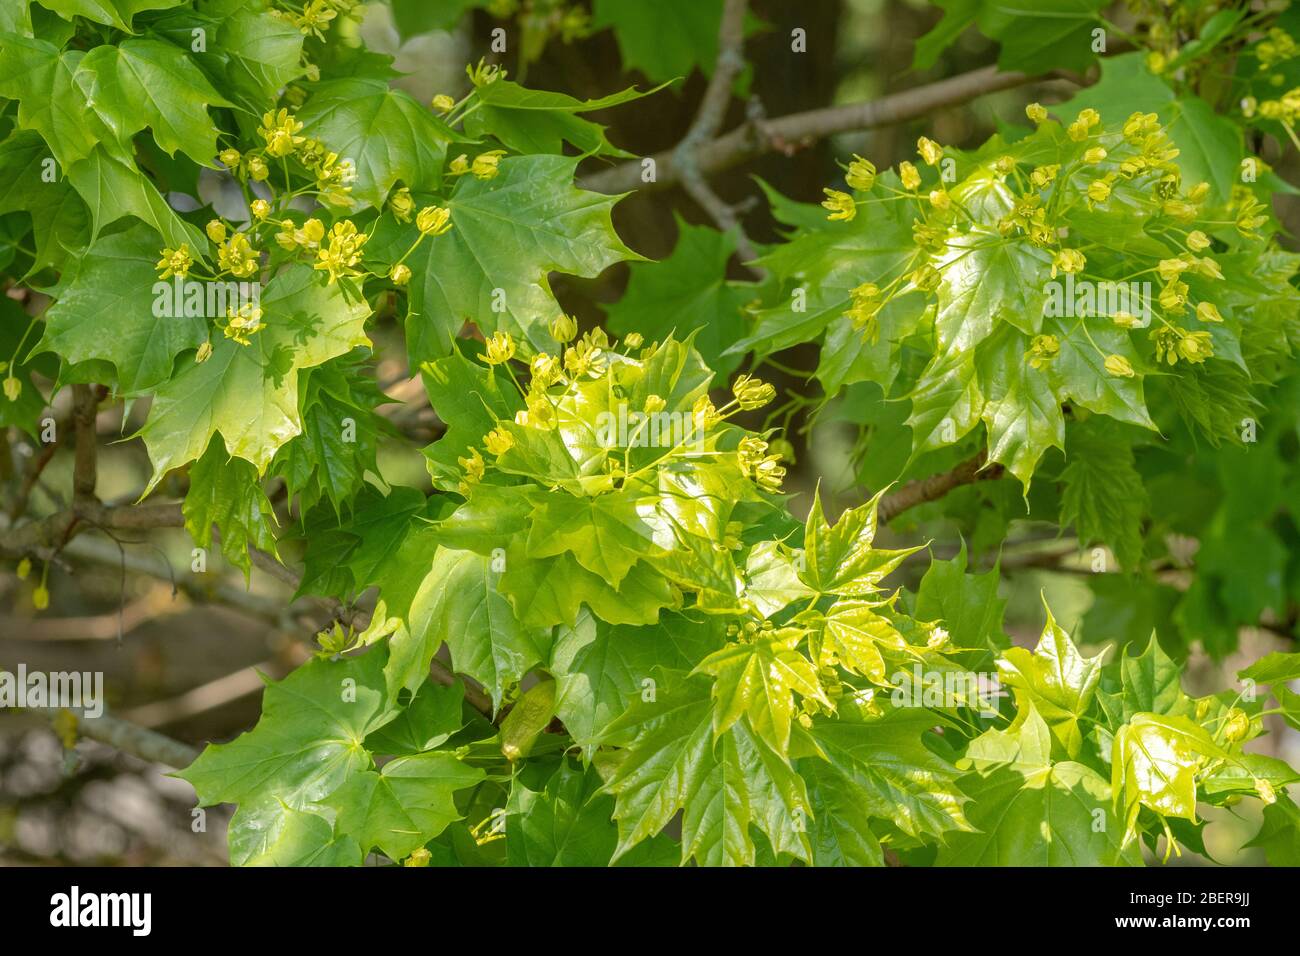 Norway maple tree (Acer platanoides) with flowers in April, UK Stock Photo